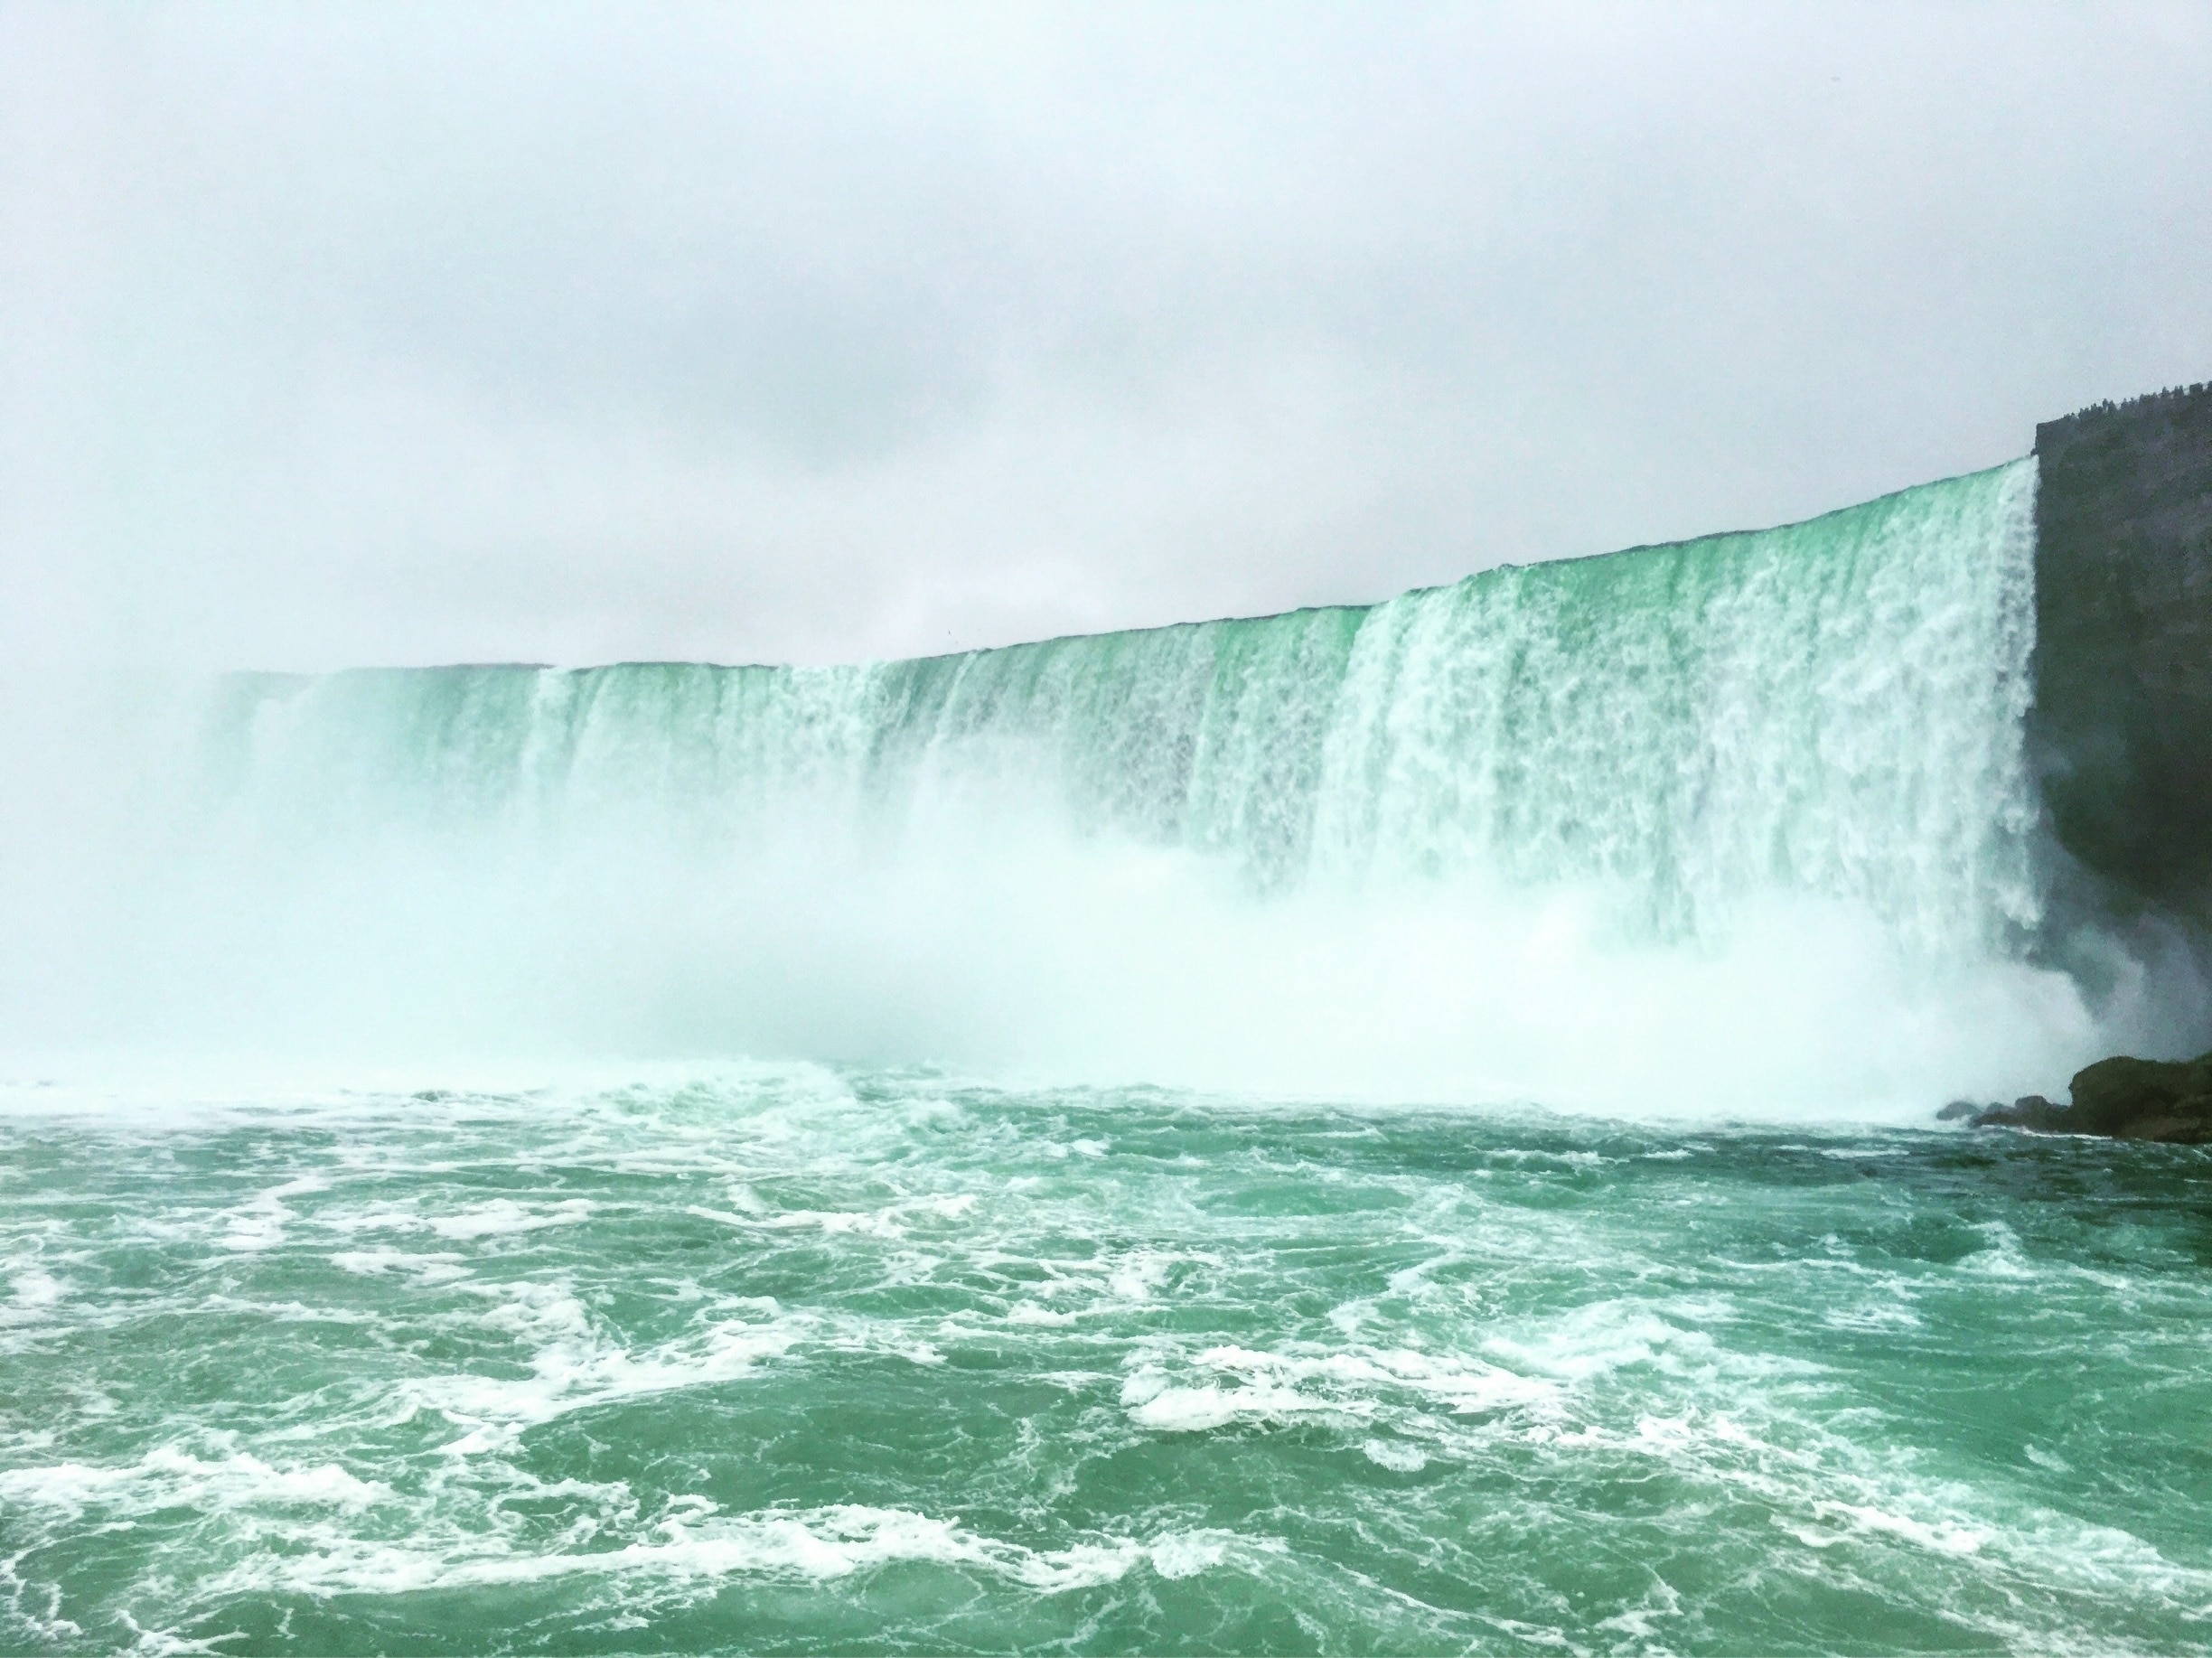 Spring hasn't quite come to upstate NY/Canada yet but I had #springfun visiting #niagarafalls this past weekend! 

#dontgochasinwaterfalls #travel #ohcanada #waterfalls